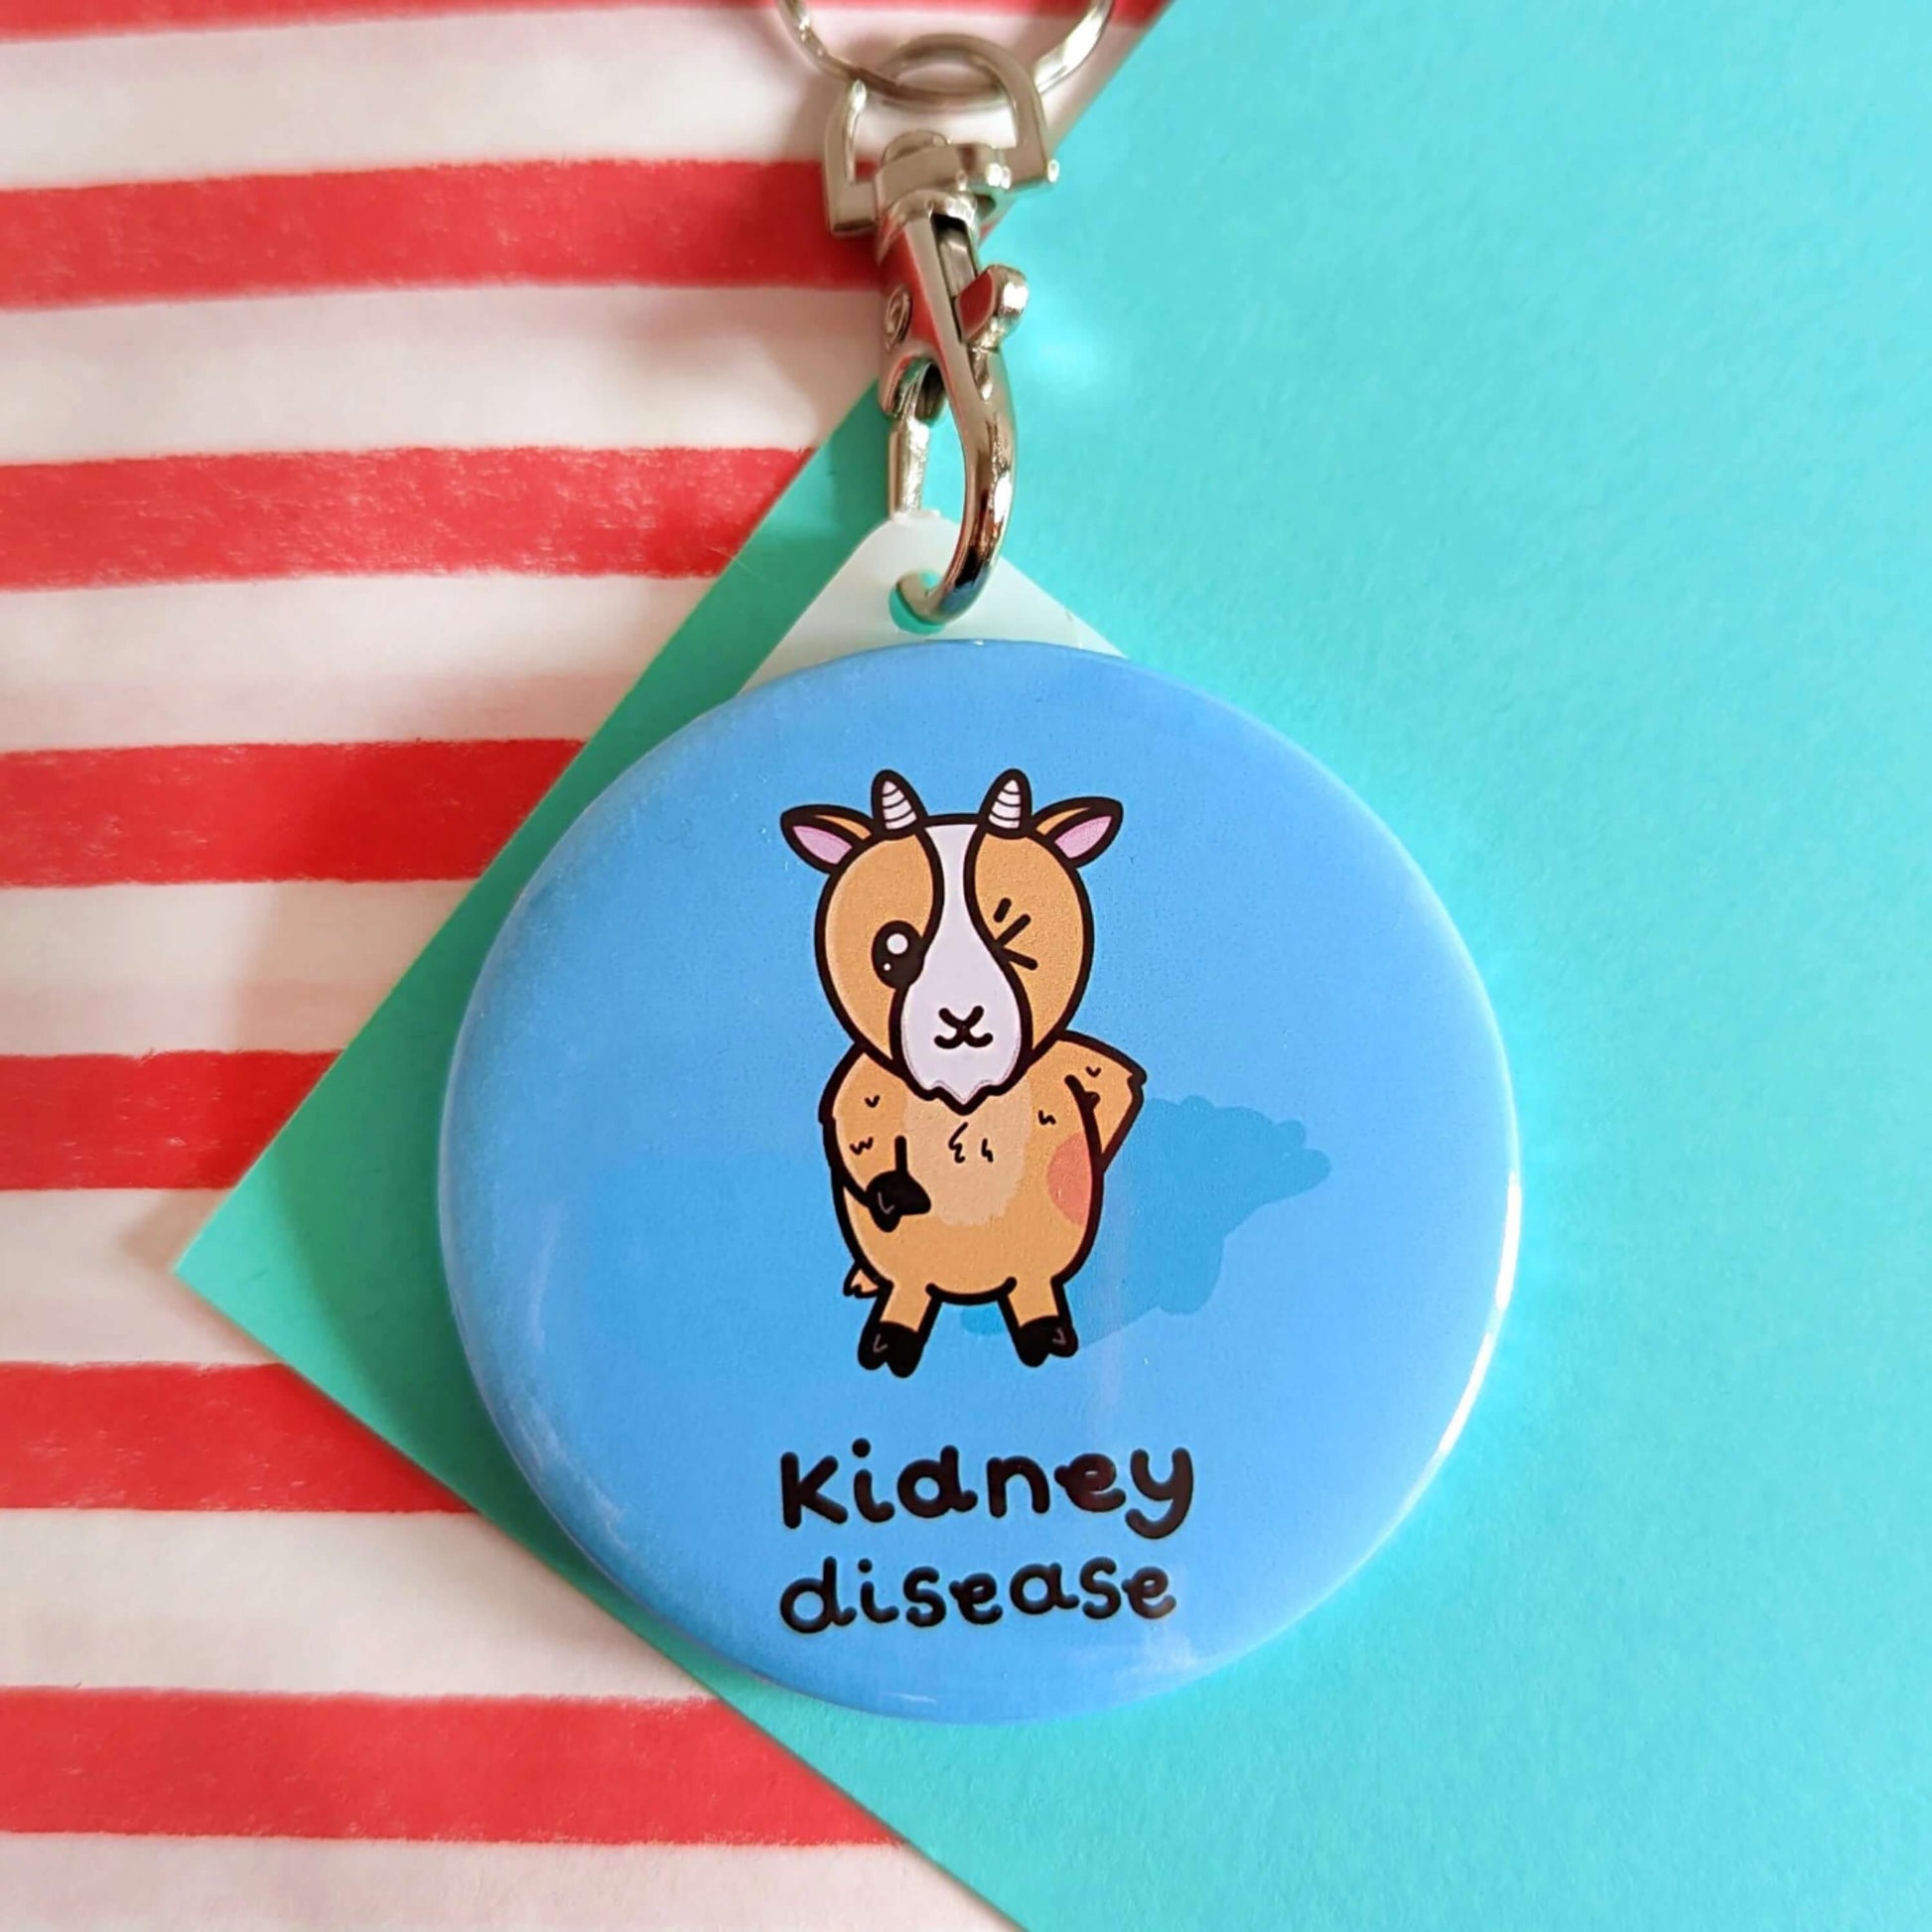 The Kidney Disease Goat Keyring - Kidney Disease on a red and blue background. The pastel blue plastic circular keychain has a silver lobster clip and an orange goat with little horns stood up winking with a red right hand side, underneath in black text reads 'kidney disease'. The hand drawn design is raising awareness for kidney disease and kidney failure.